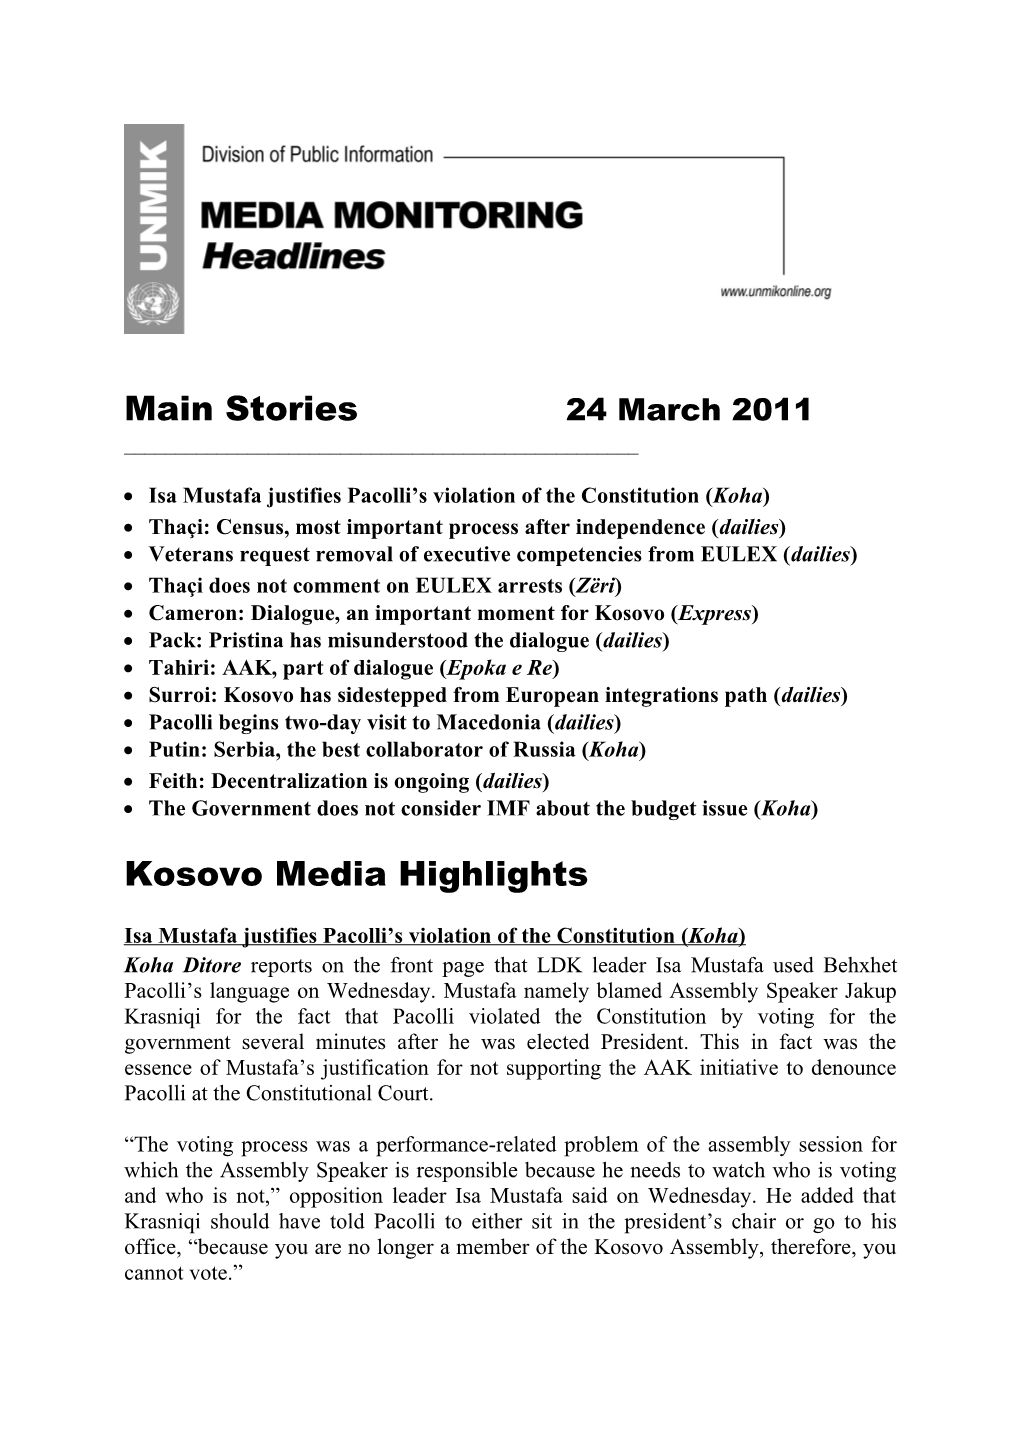 Main Stories 24March 2011